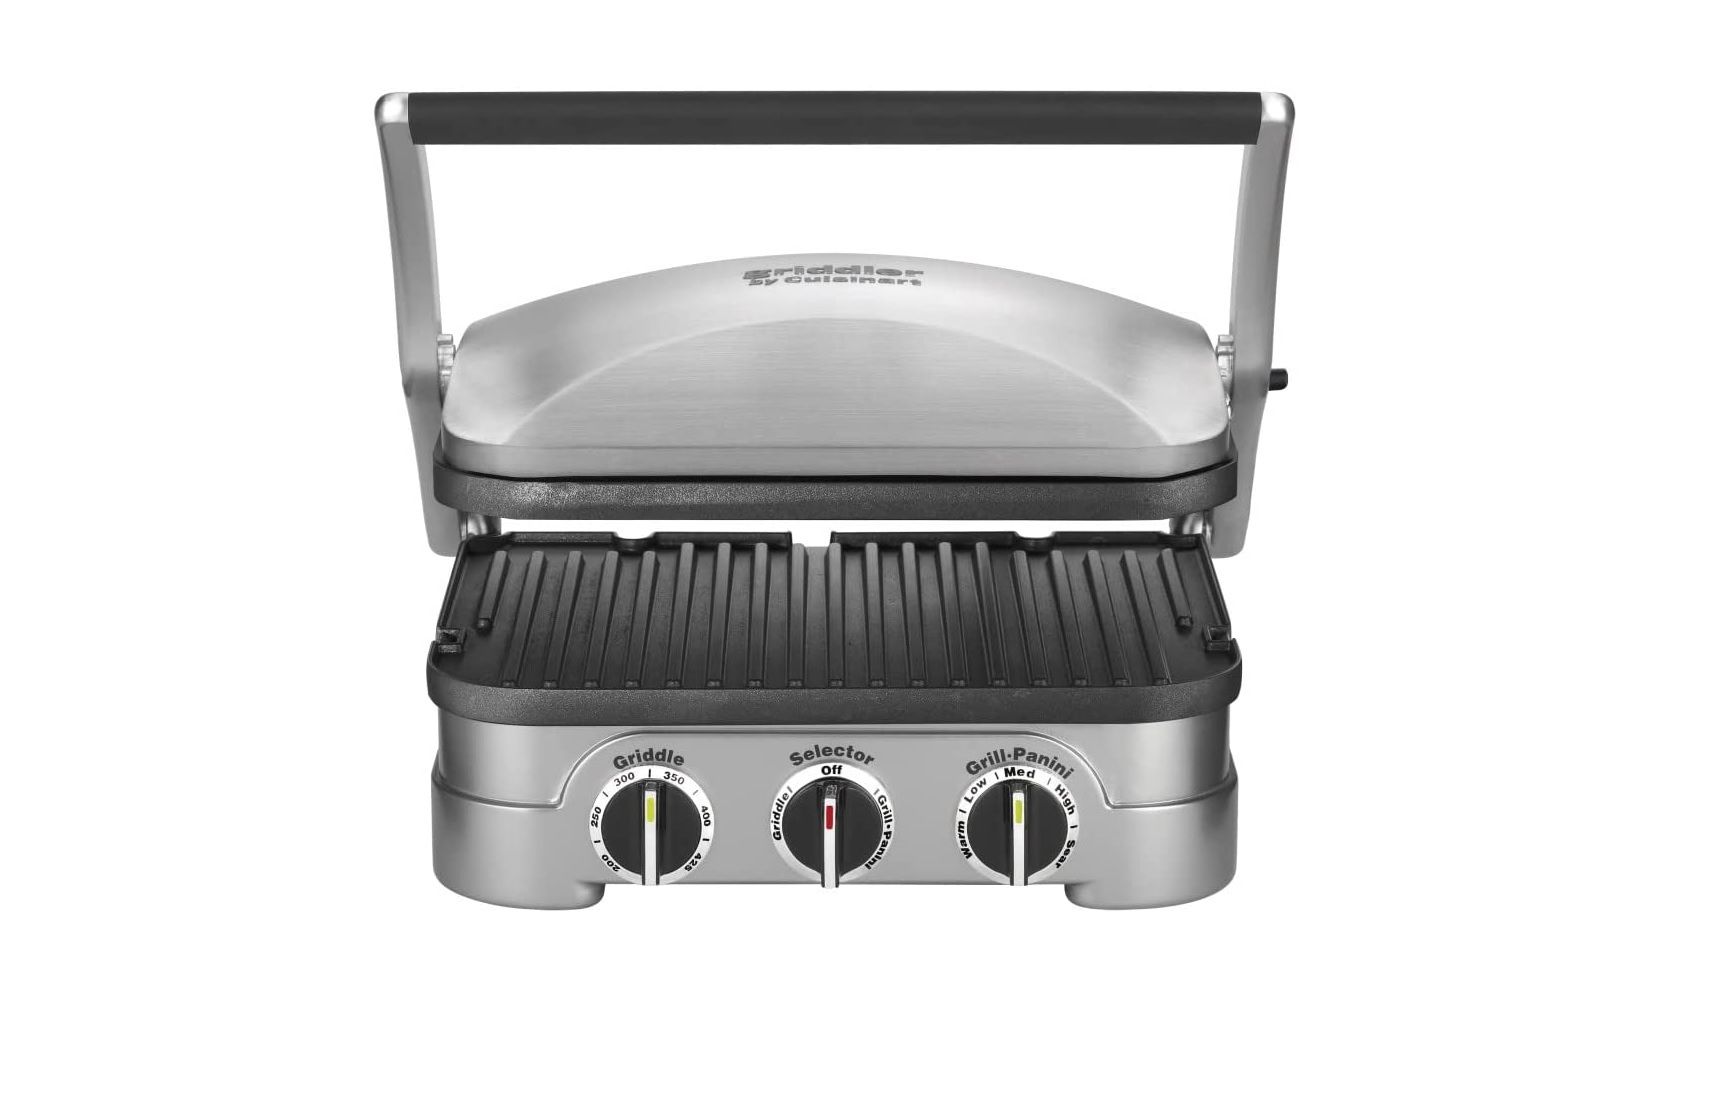 front view of the cuisinart 5 in 1 panini press